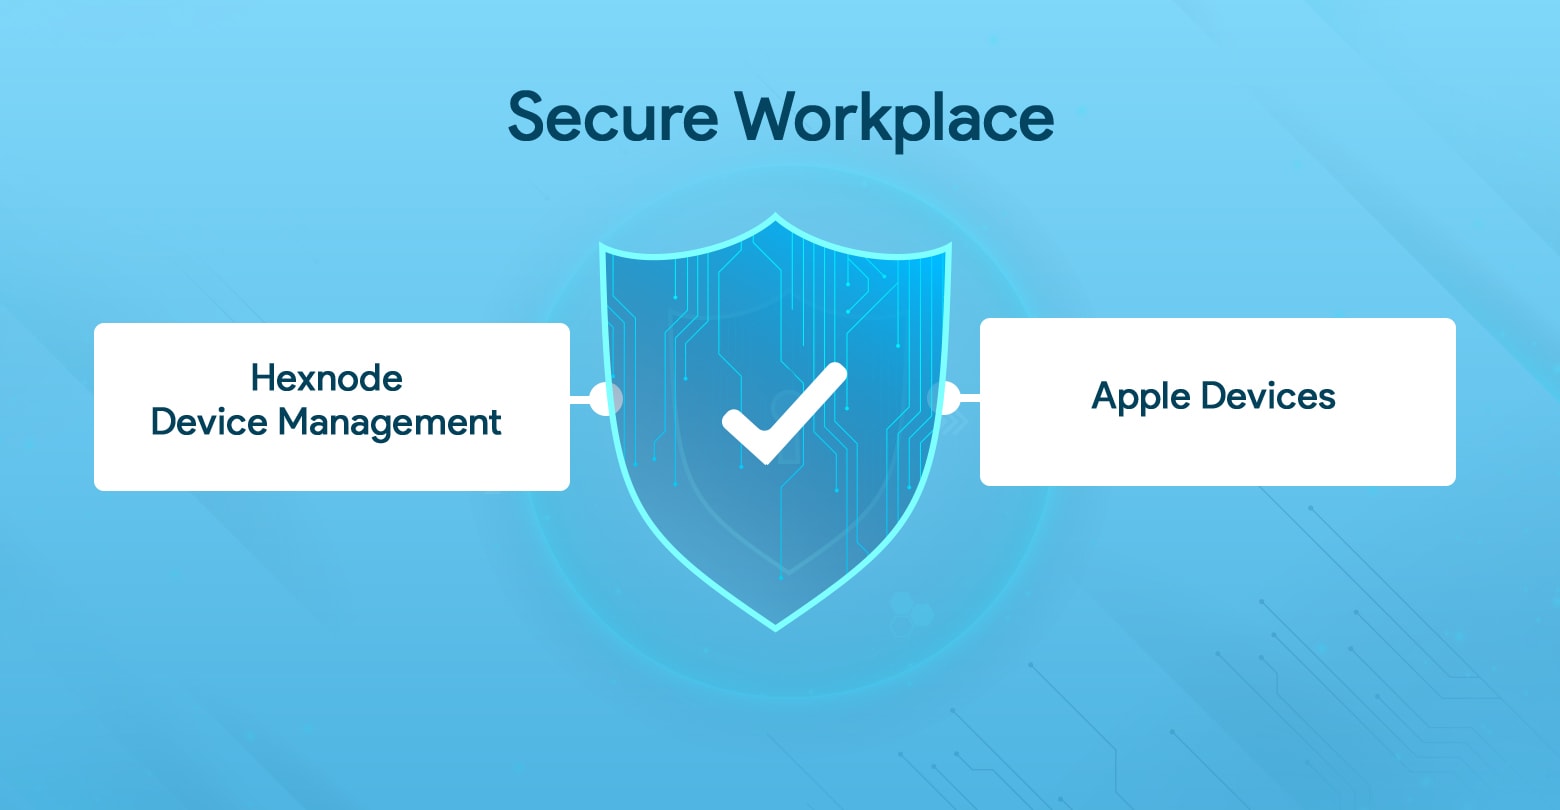 Keep your workplace secure from threats with an easy-to-use centralized MDM platform.